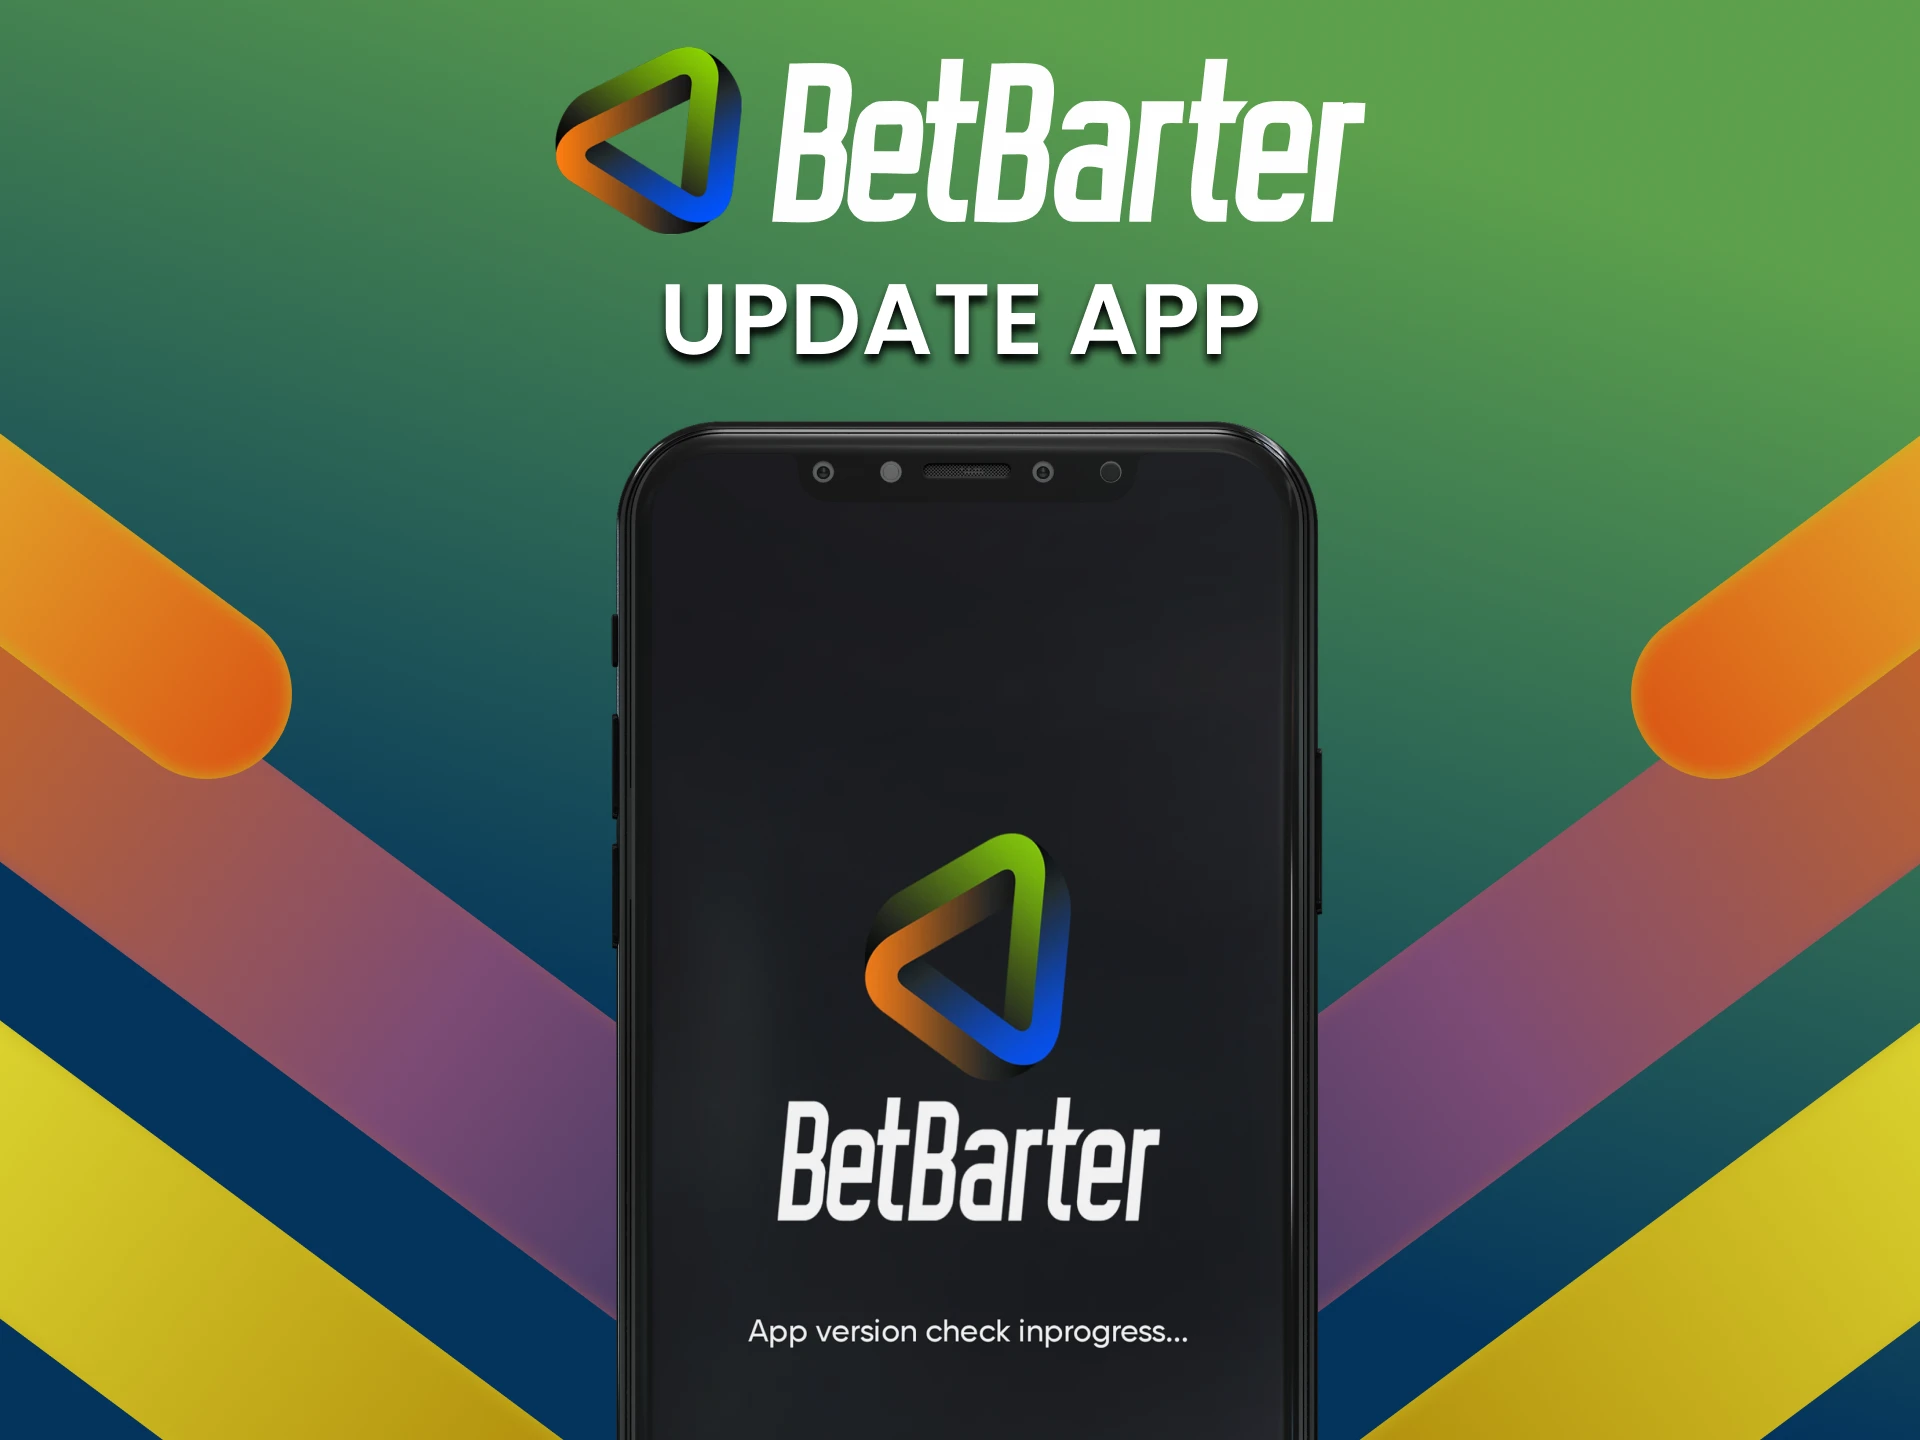 Stay tuned for updates to the BetBarter app in India.